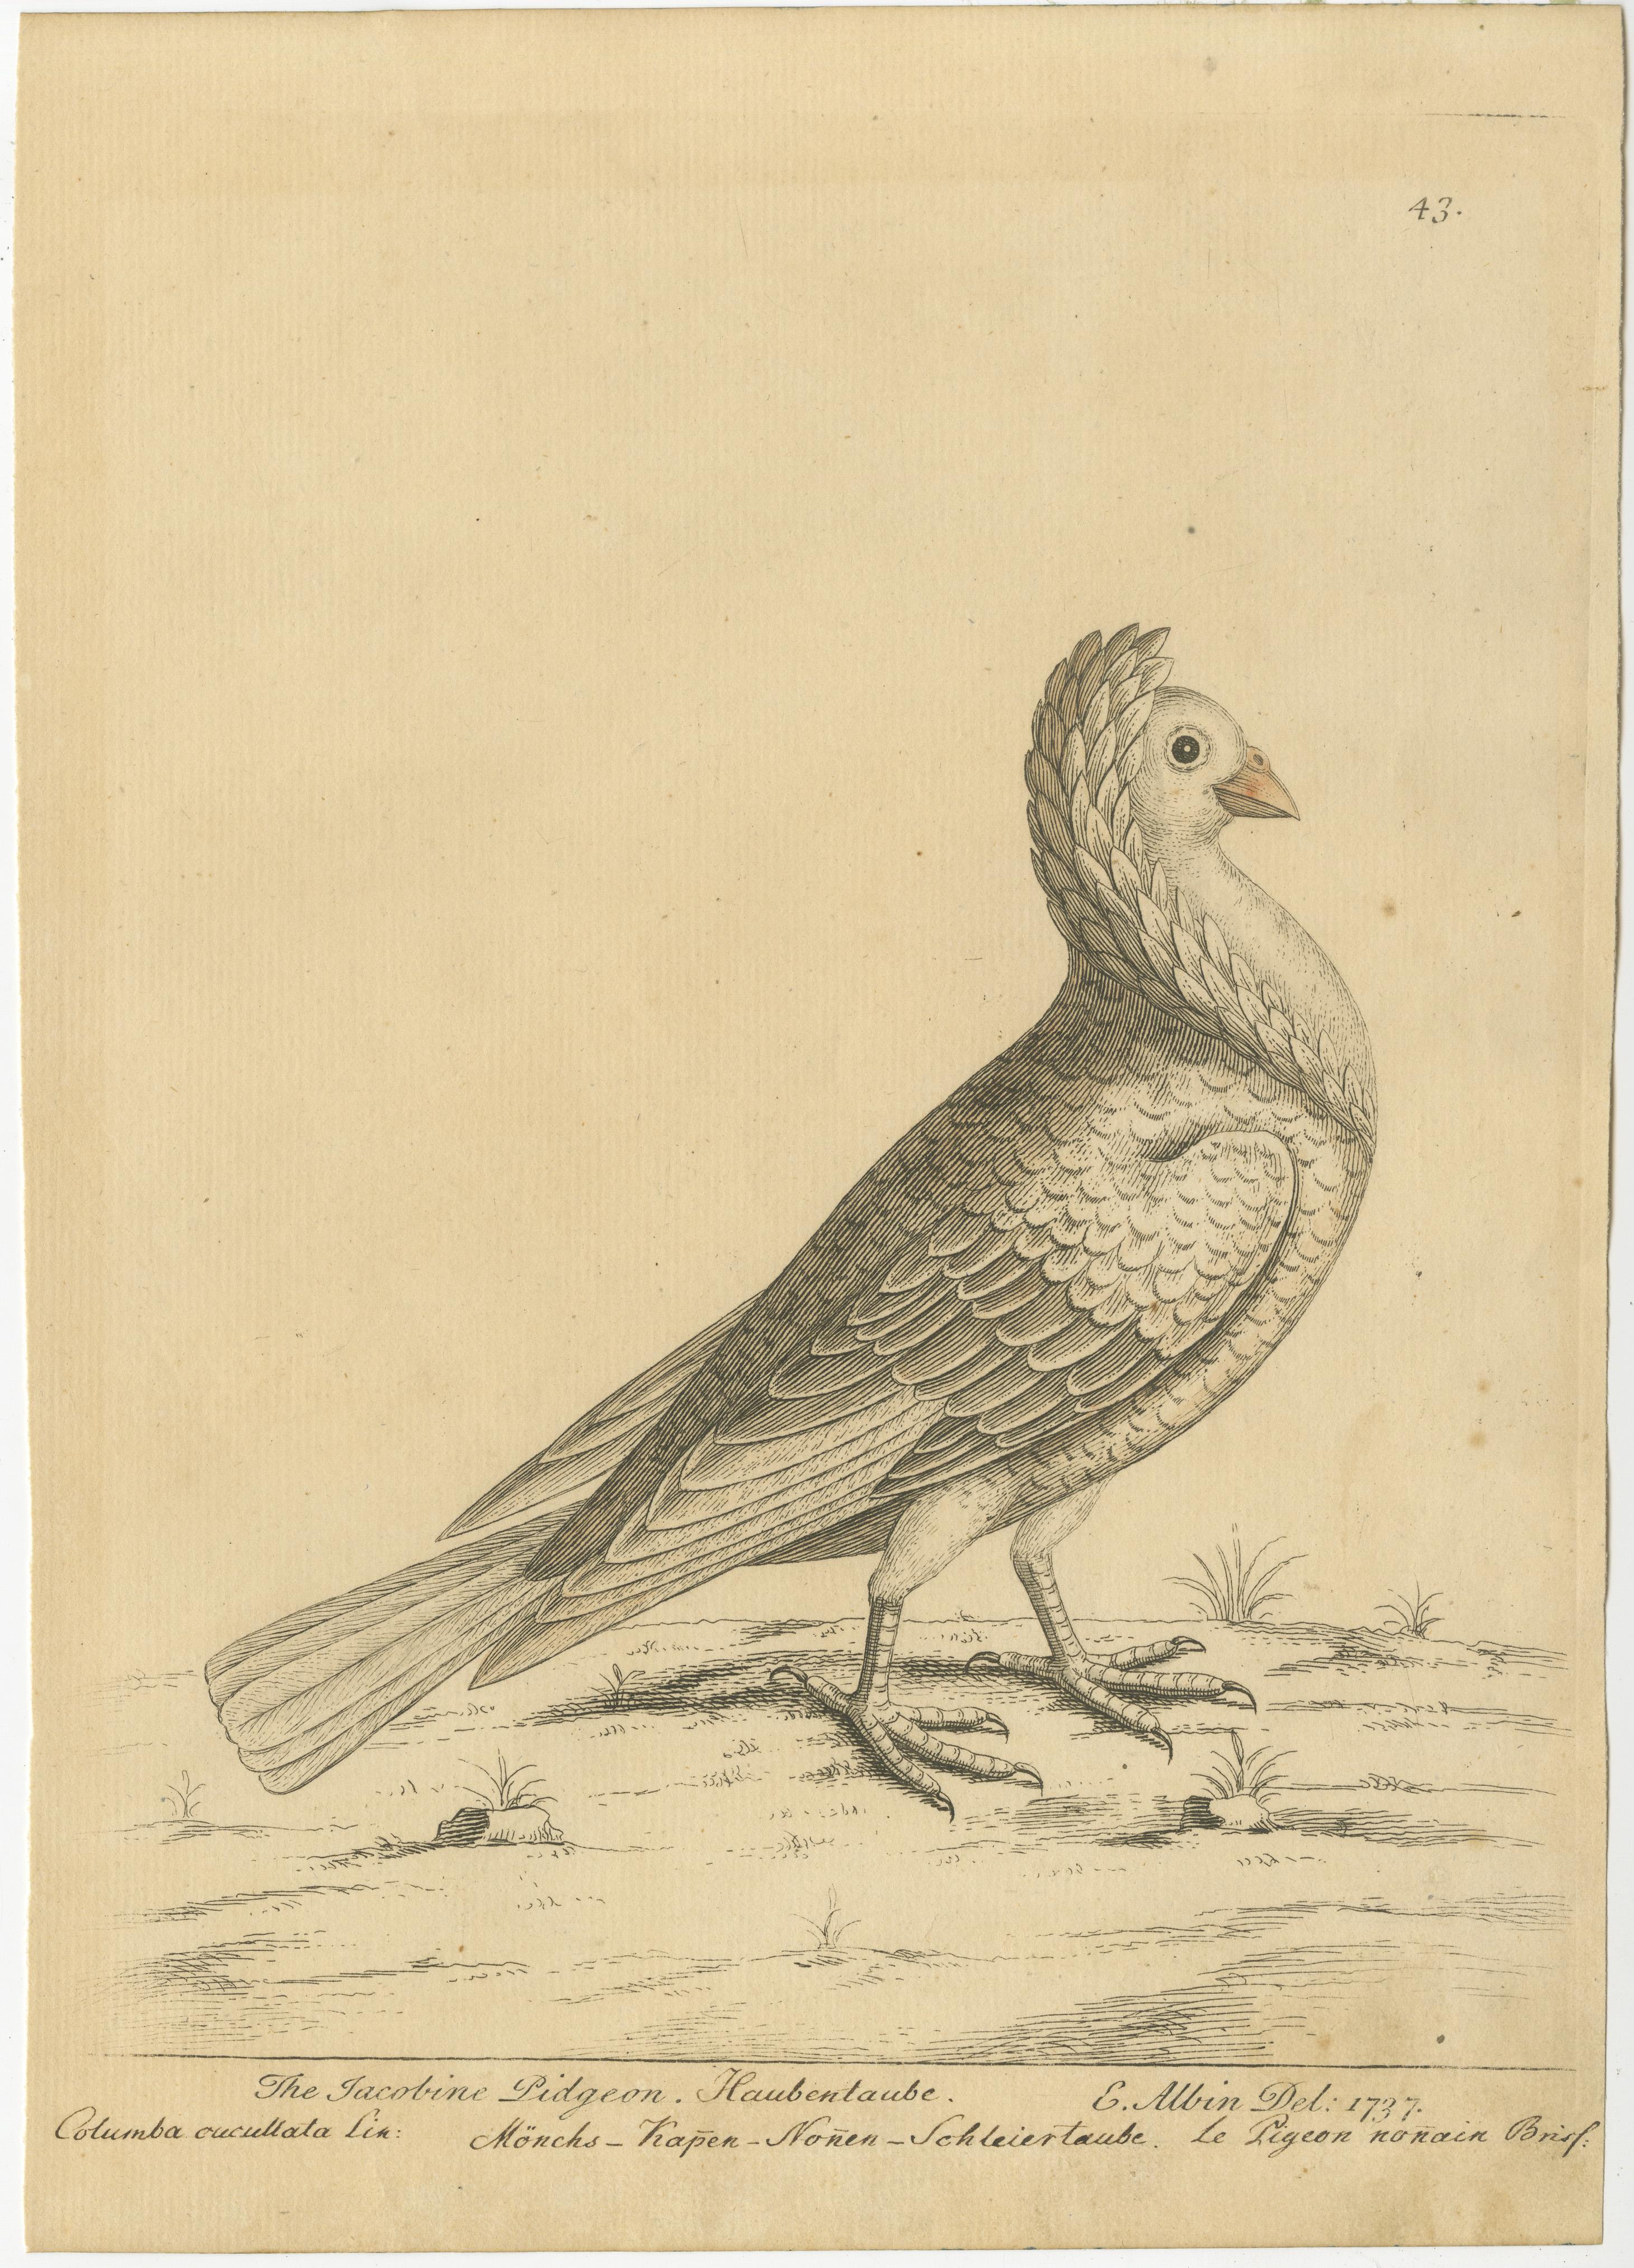 Antique bird print titled 'The Jacobine Pidgeon'. Original antique print of a jacobin pigeon. This print originates from 'A Supplement to the Natural History of Birds illustrated with an Hundred and One Copper Plates (..)' by Eleazar Albin.